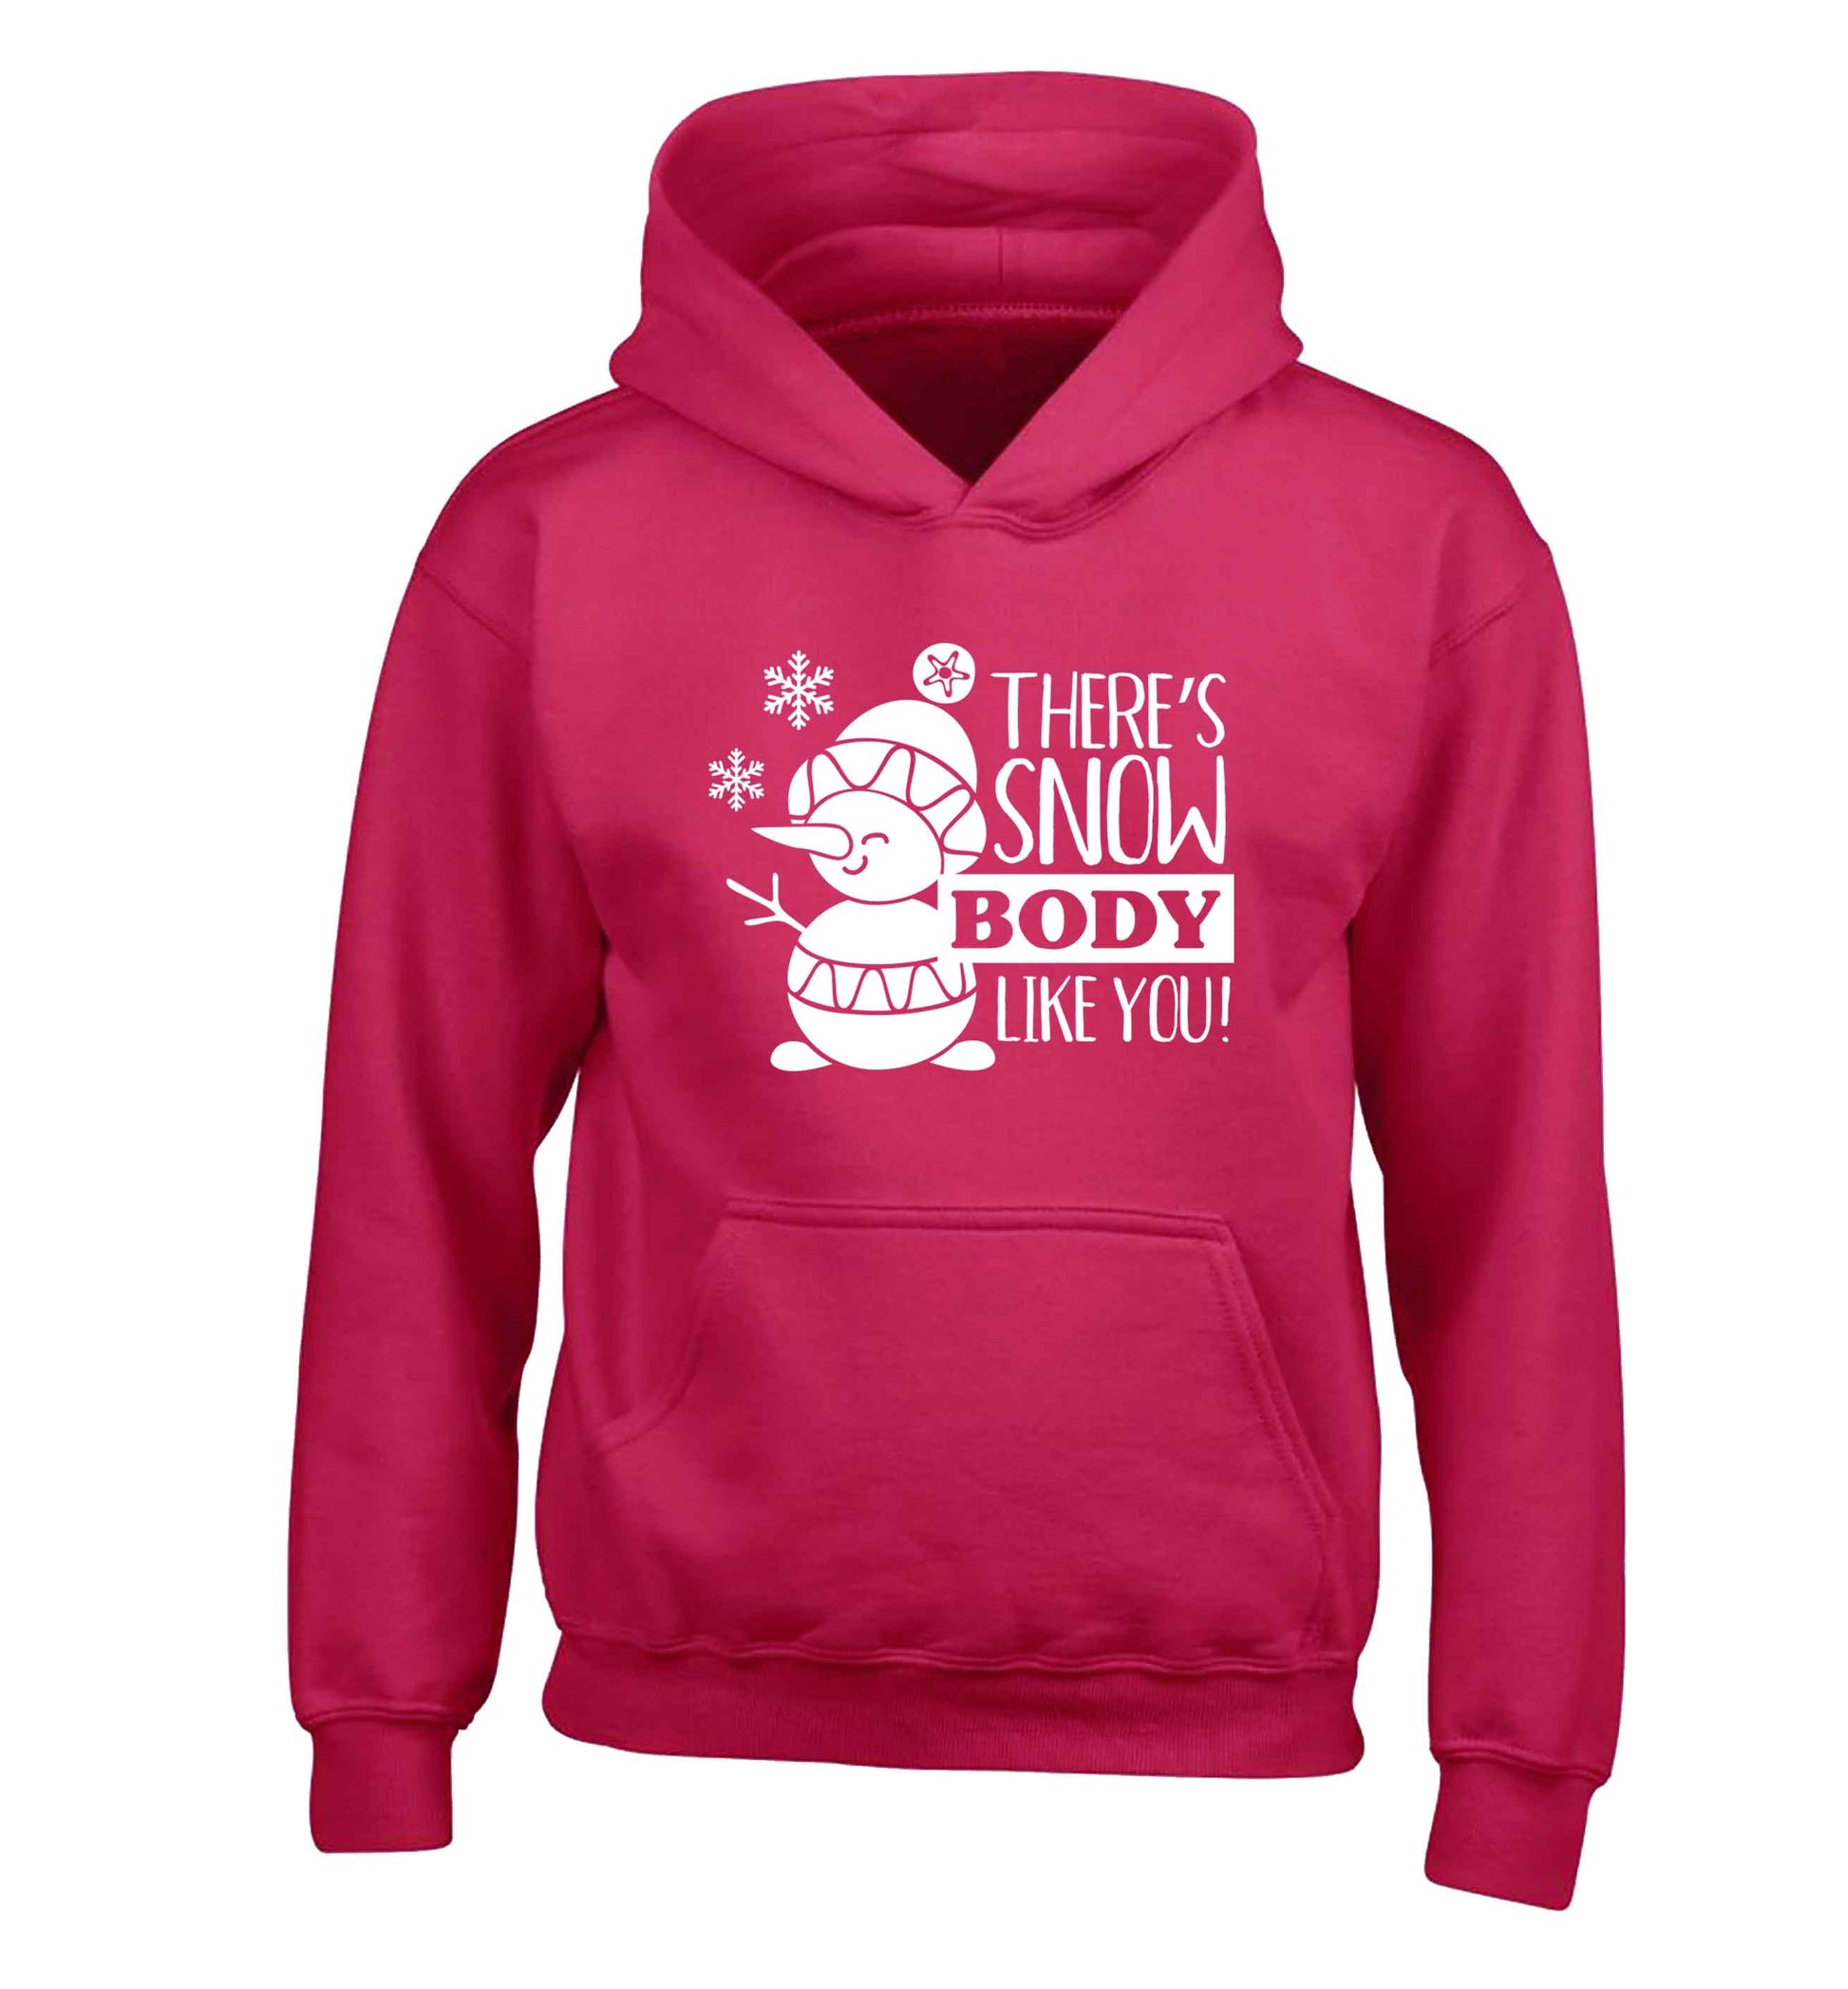 There's snow body like you children's pink hoodie 12-13 Years